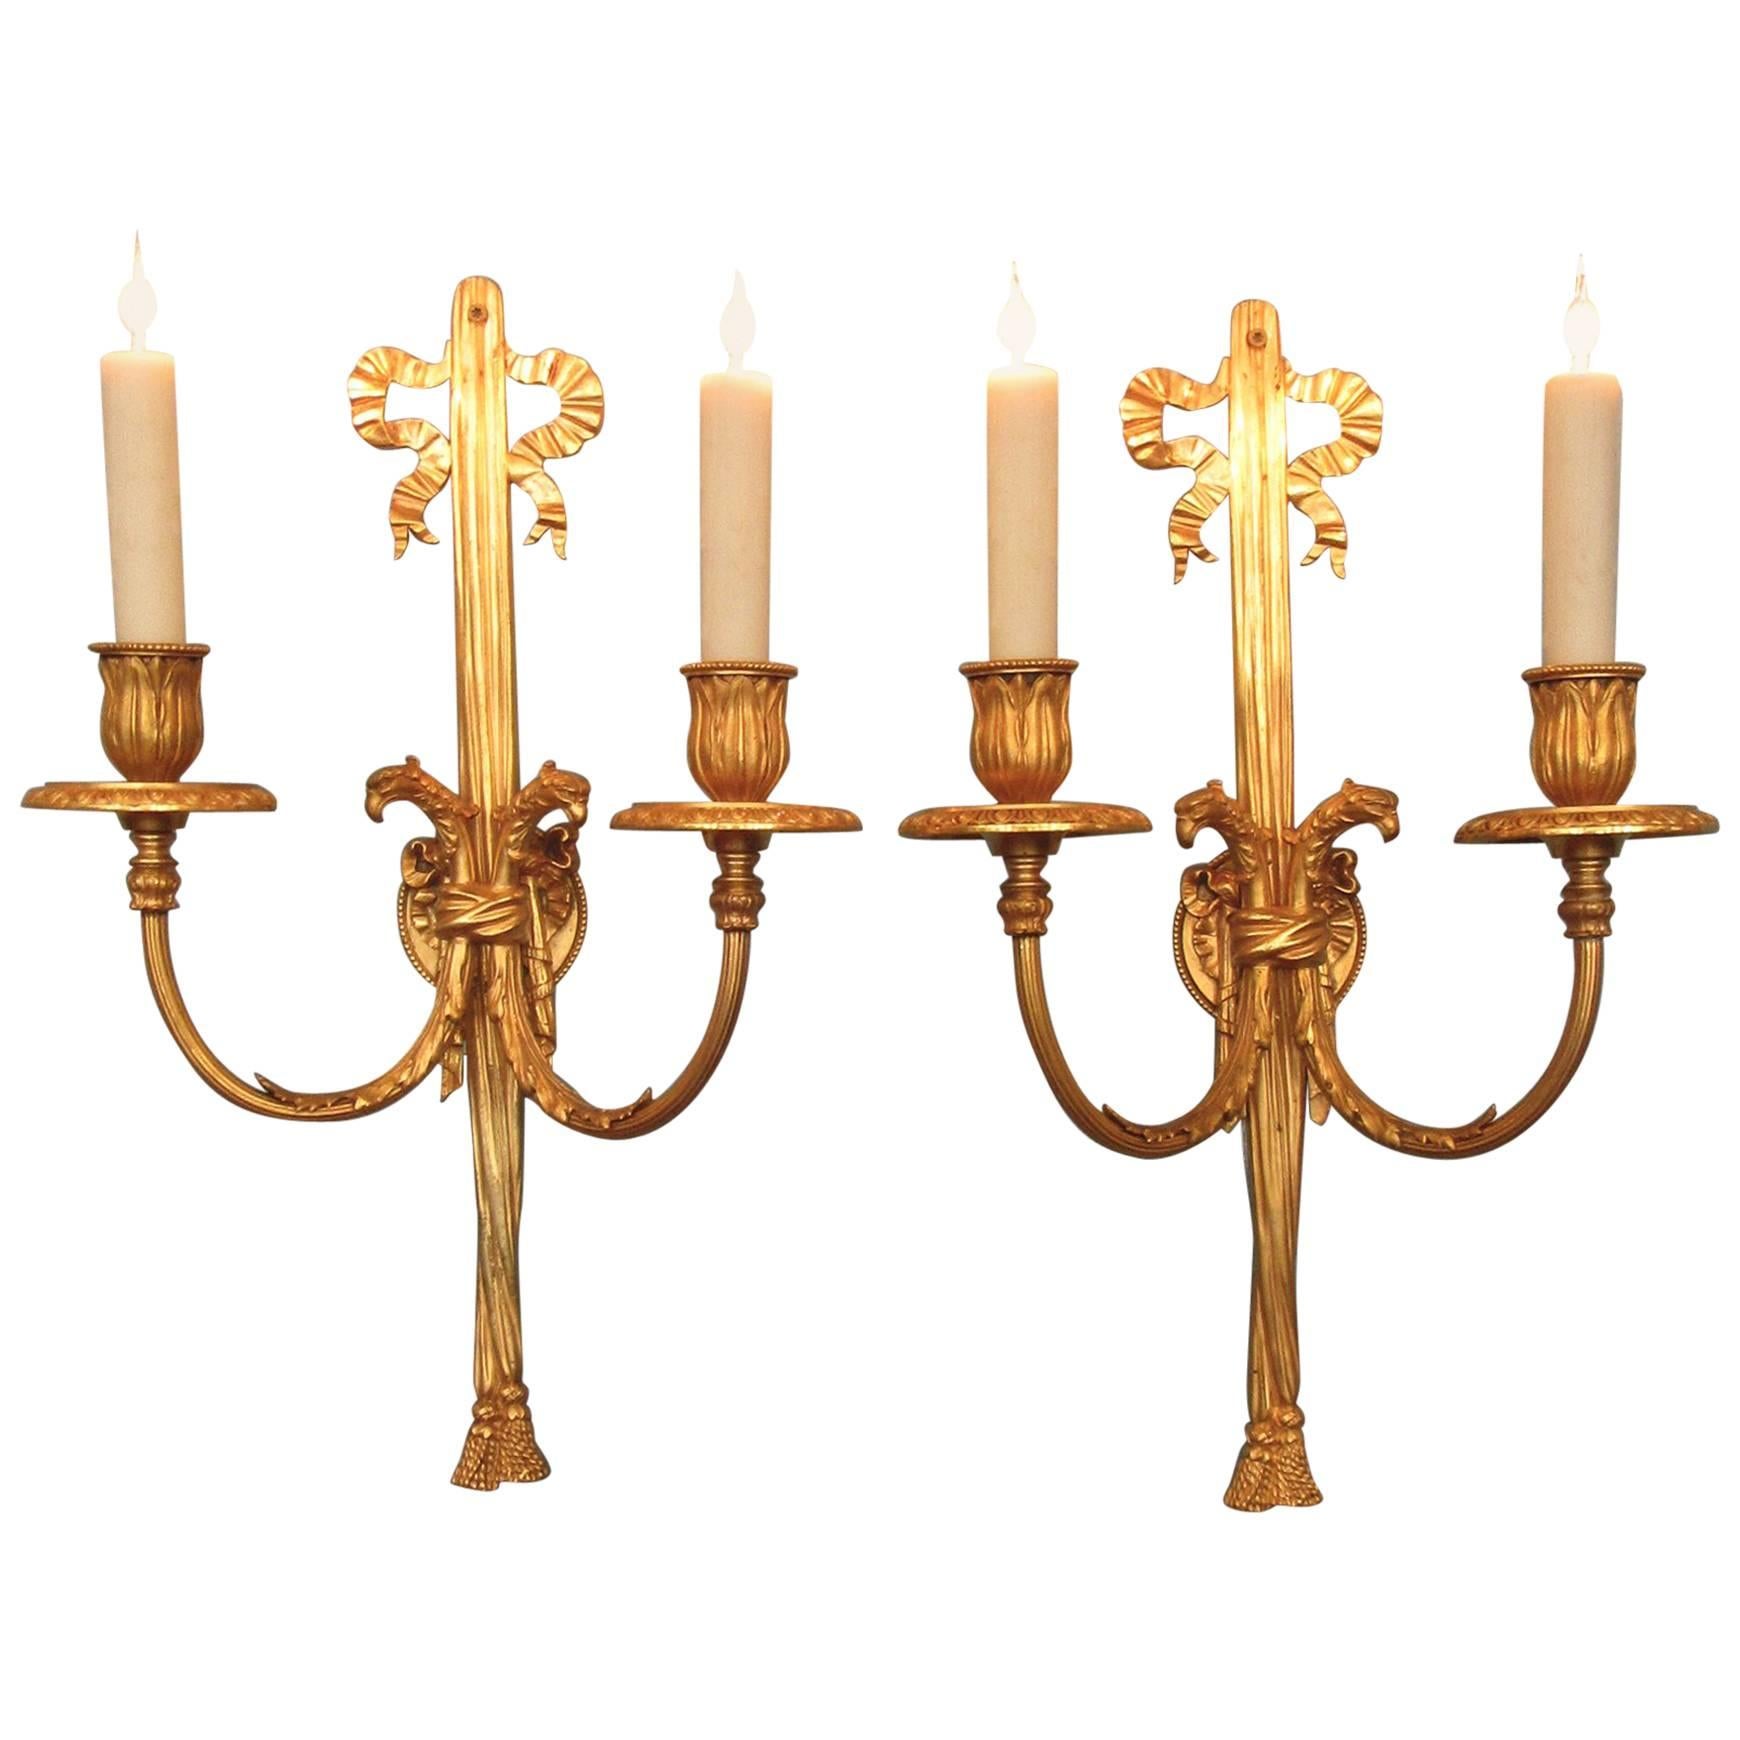 Early 20th Century, New York Regence Style Bronze Dore Sconces by Caldwell & Co